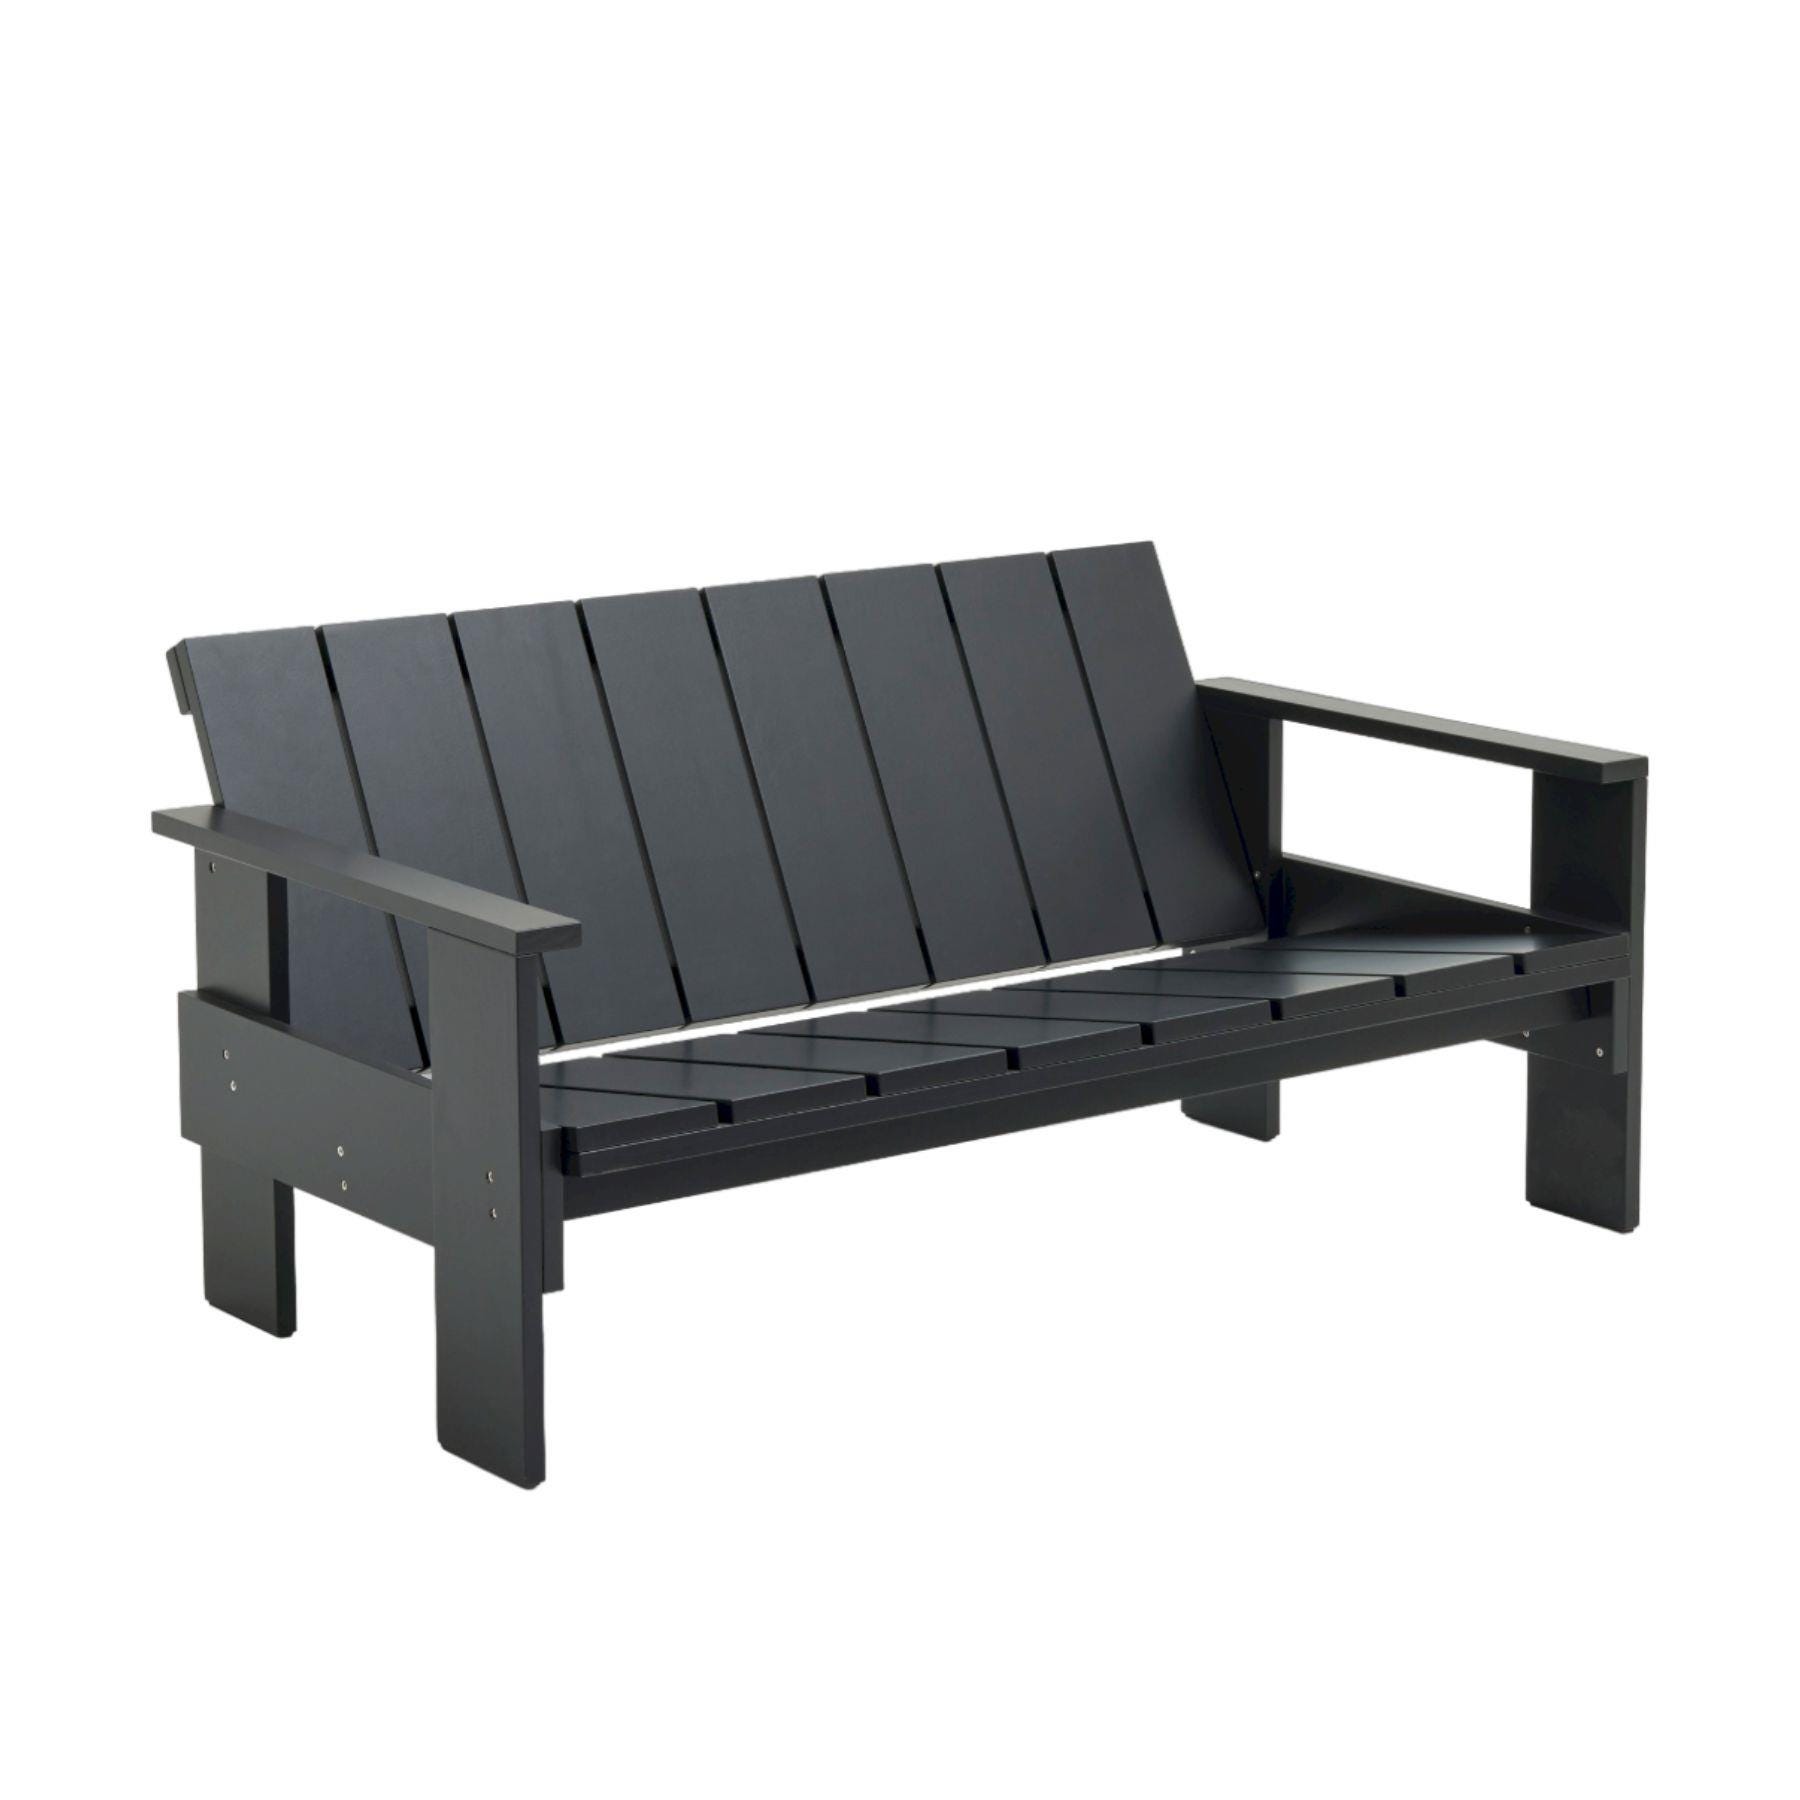 Hay Crate Lounge Sofa Black Designer Furniture From Holloways Of Ludlow